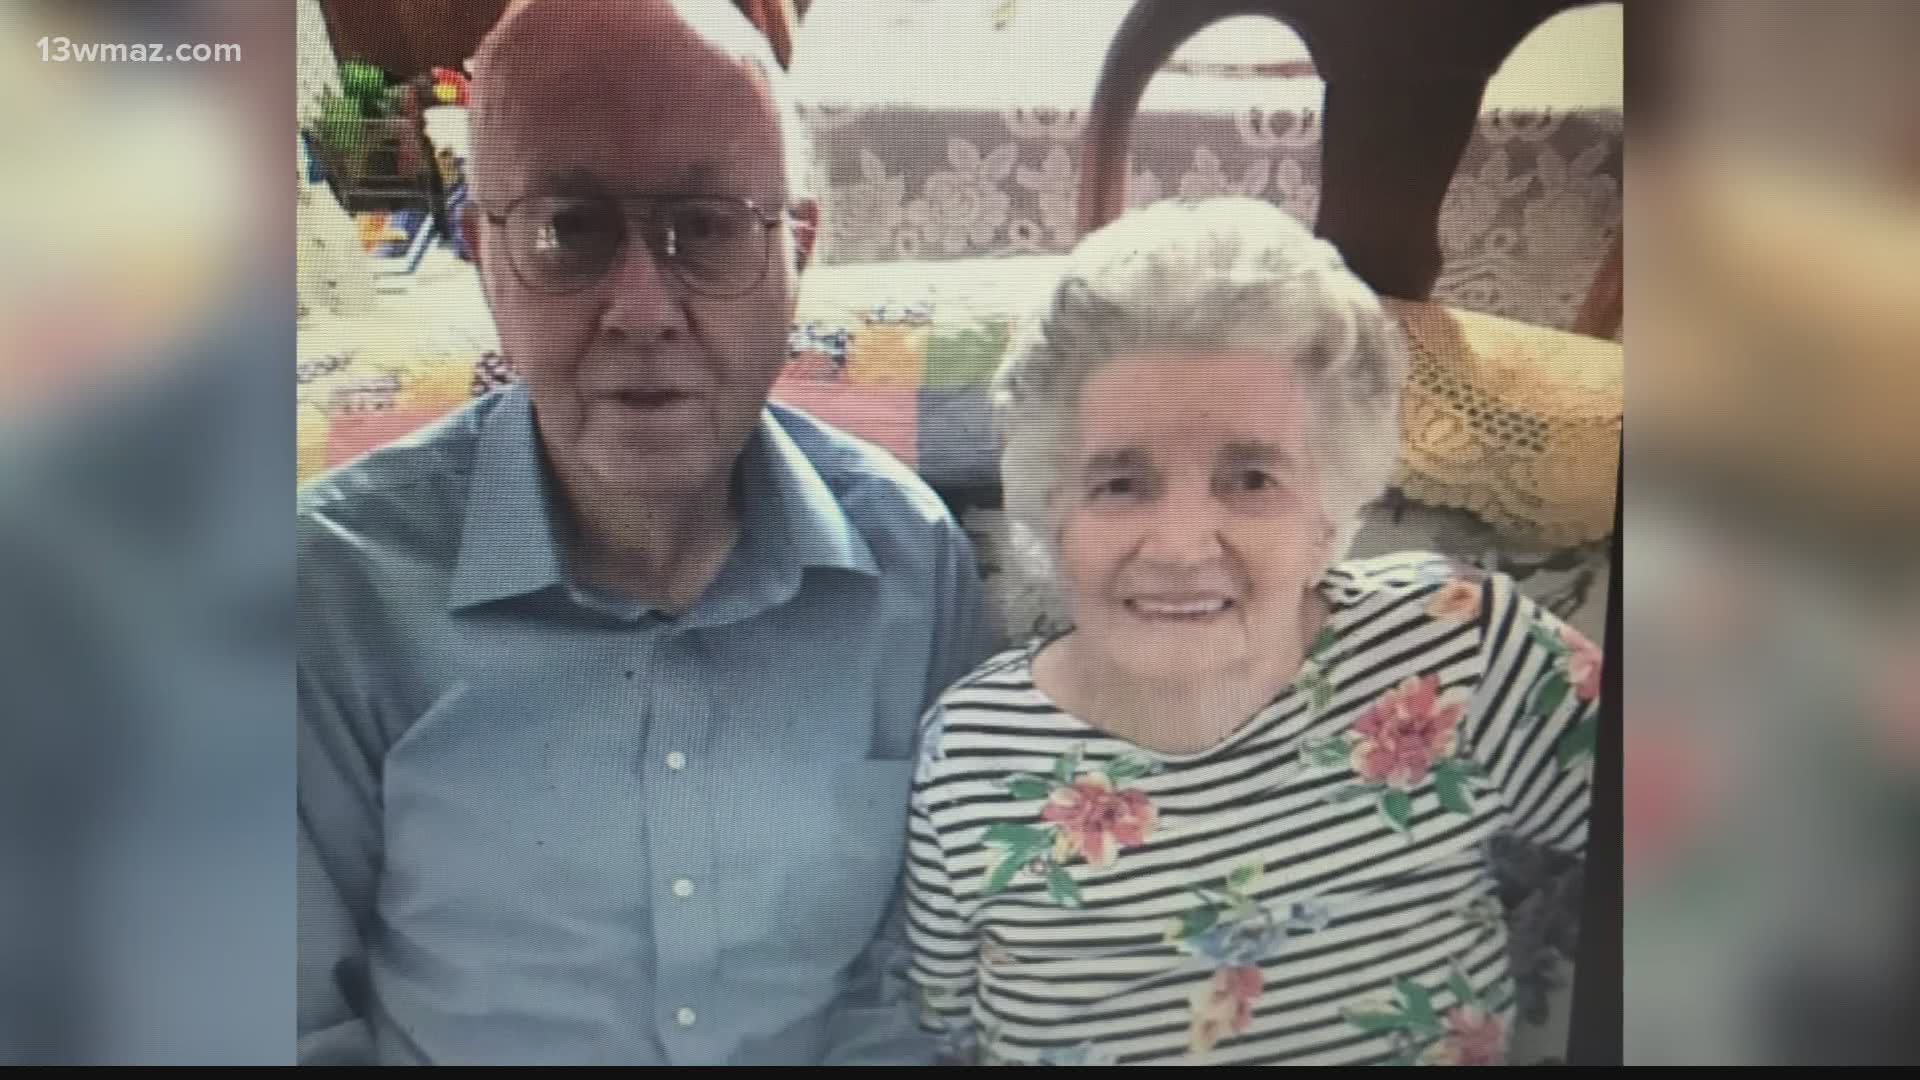 Jim and Annie Devane have been married for 70 years. For the last 14 weeks, they've been separated by a window. Now, they finally get to hug each other again